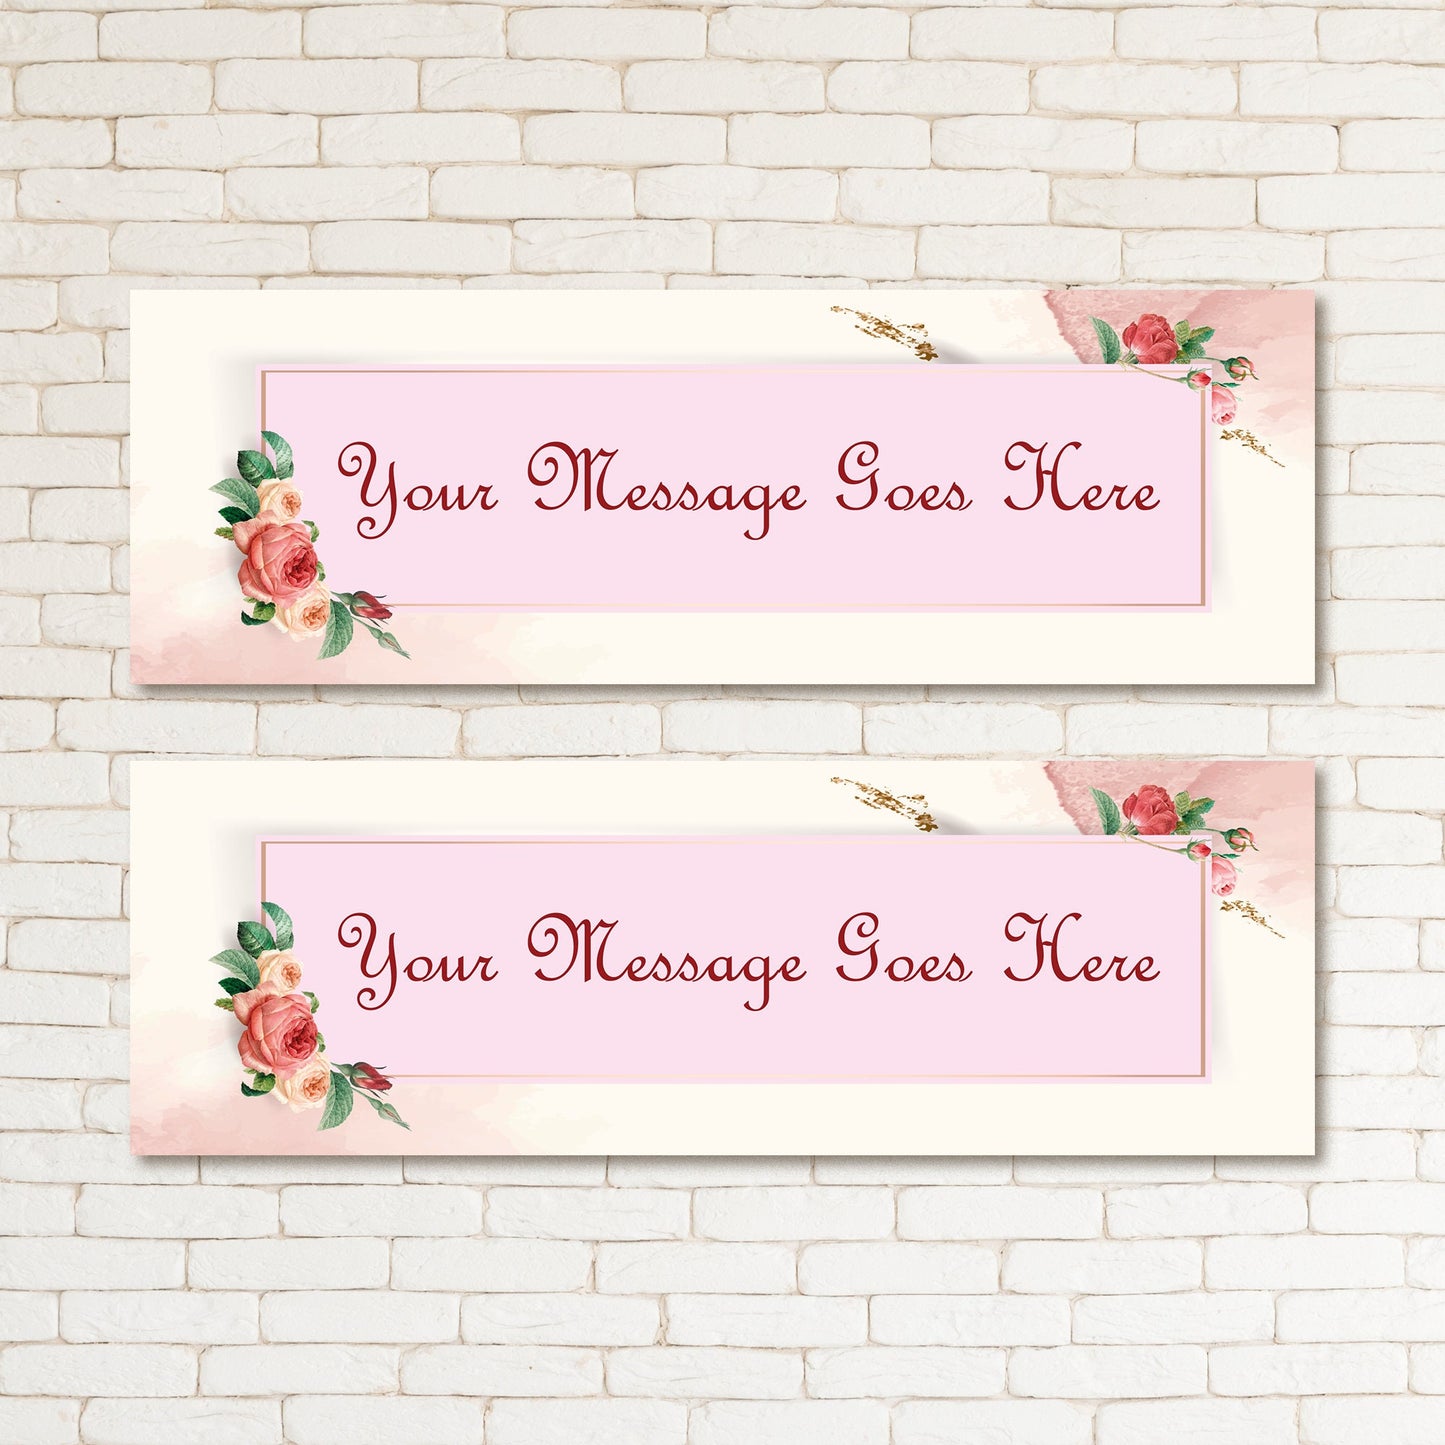 Set of 2 Personalised Very English Rose Kids Adult Party Banner Event Decor Occasion